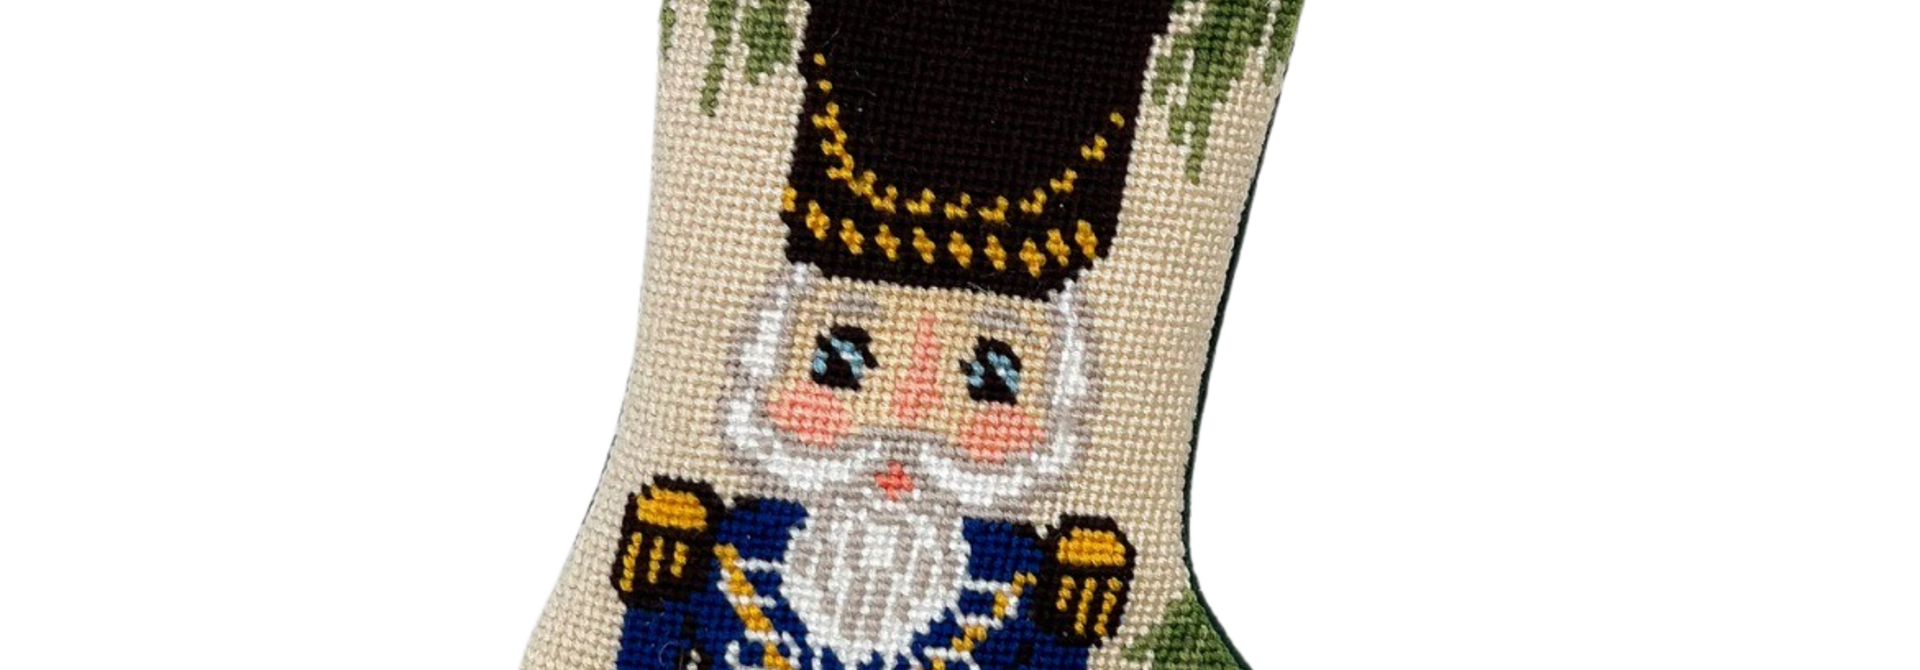 Nutcracker in Blue | The Bauble Stocking Collection - 4.25 Inch x 6 Inch